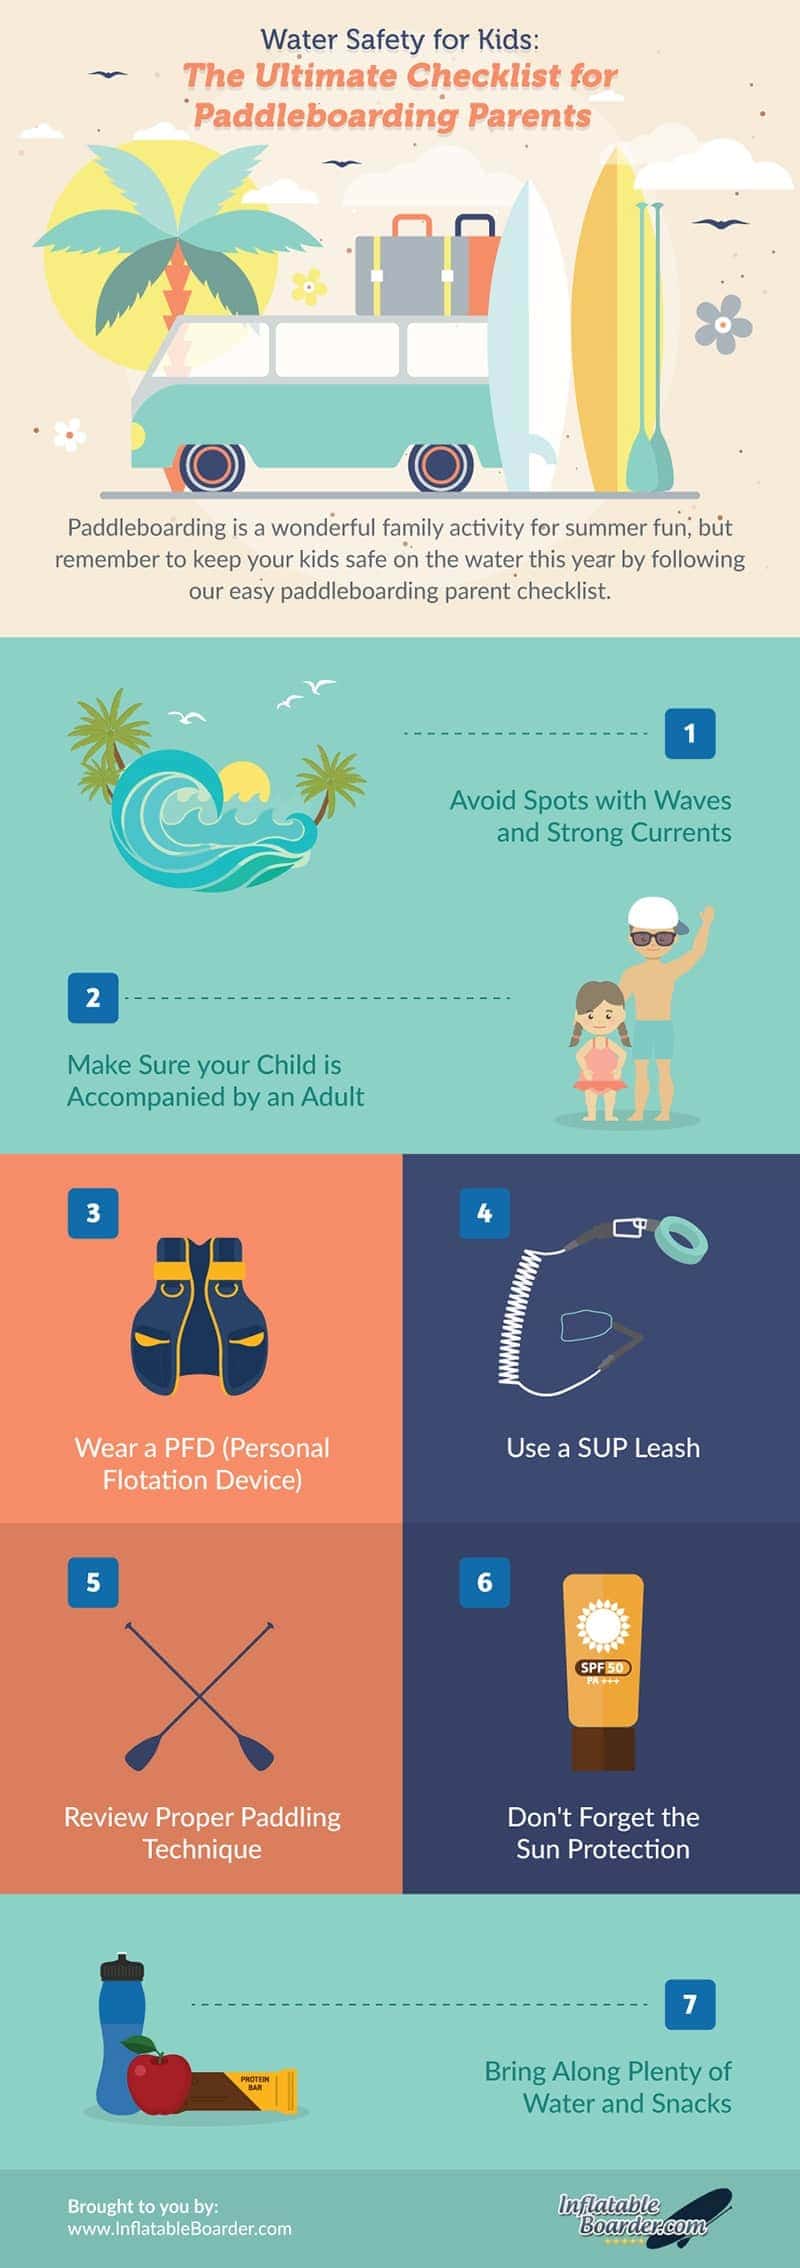 Water Safety for Kids Infographic